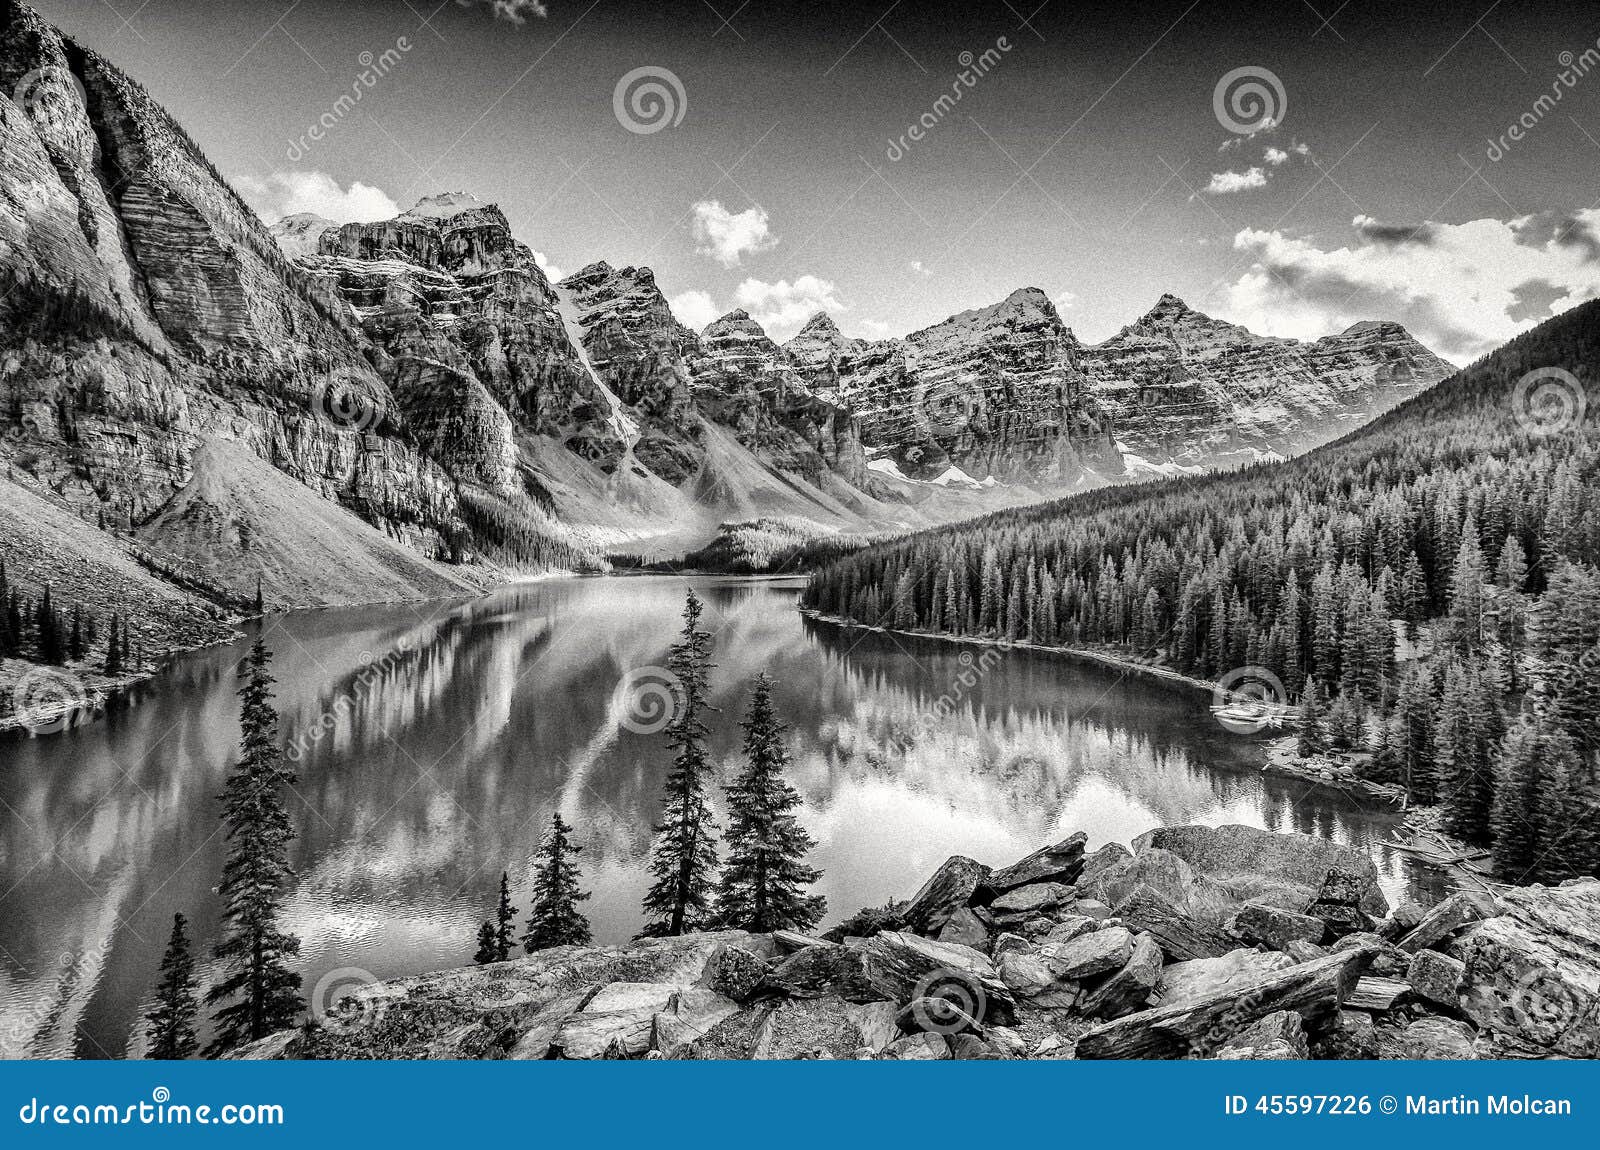 monochrome filtered scenic view of moraine lake, rocky mountains